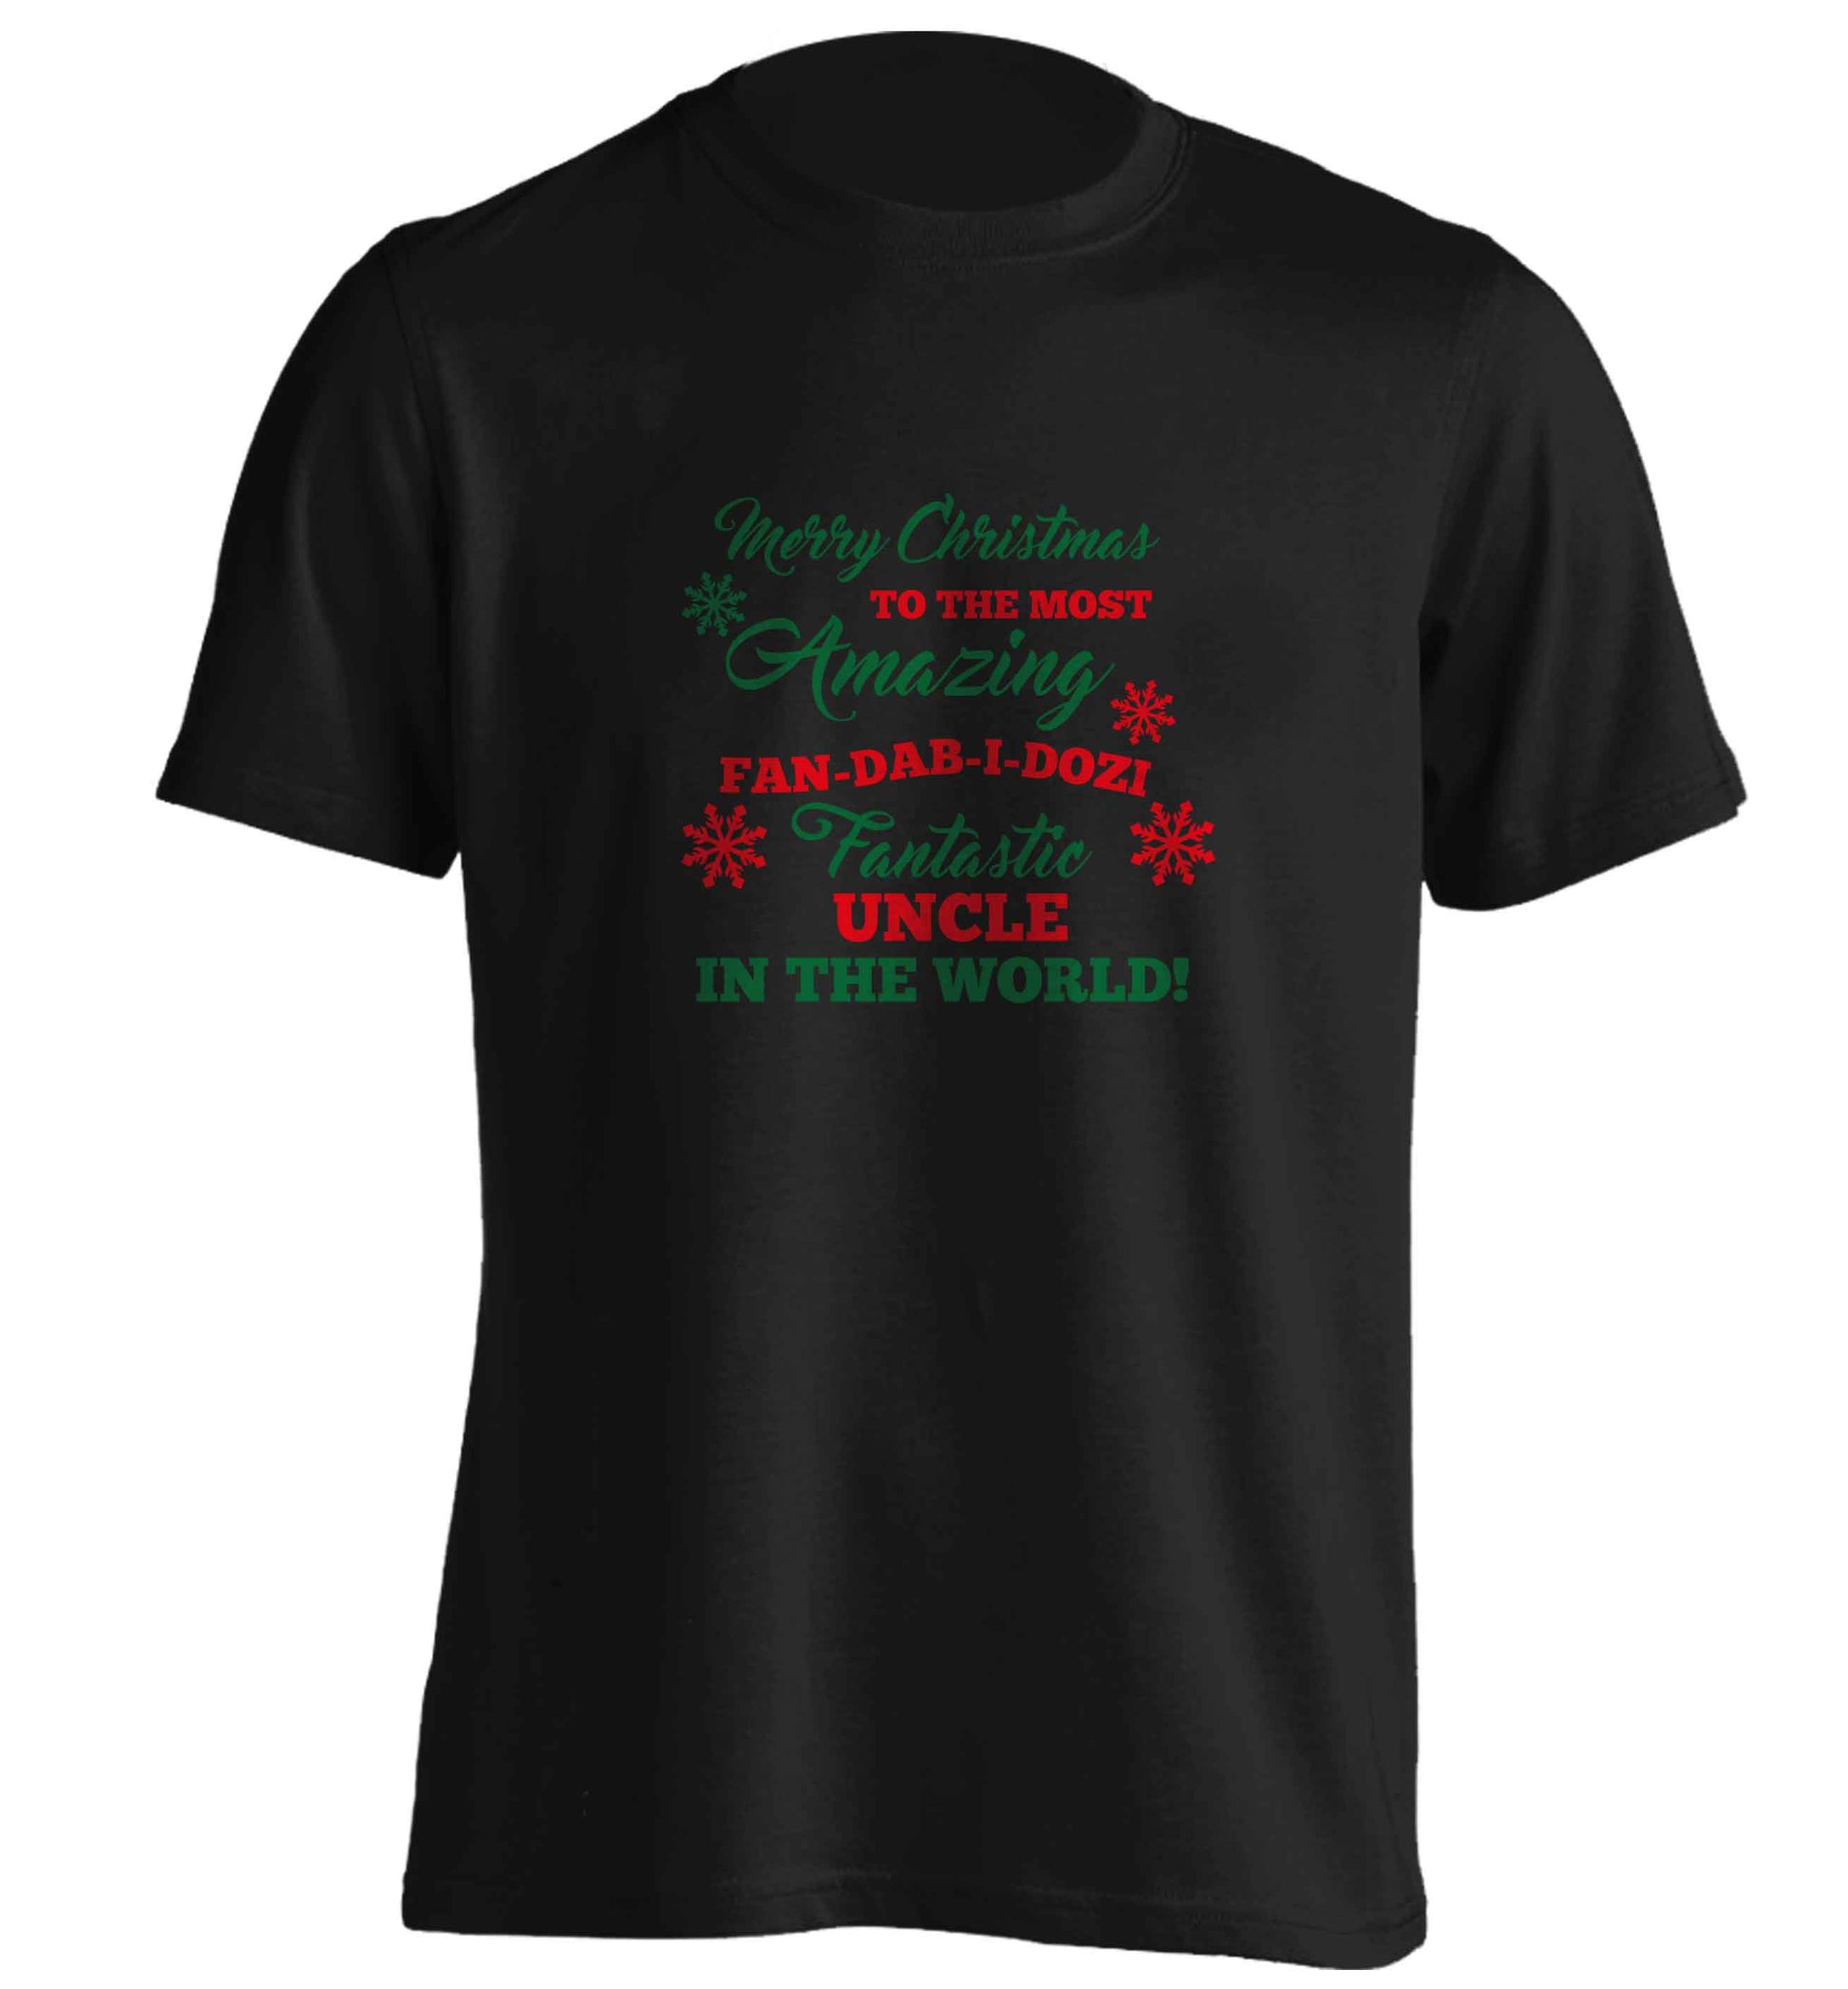 Merry Christmas to the most amazing fan-dab-i-dozi fantasic Uncle in the world adults unisex black Tshirt 2XL